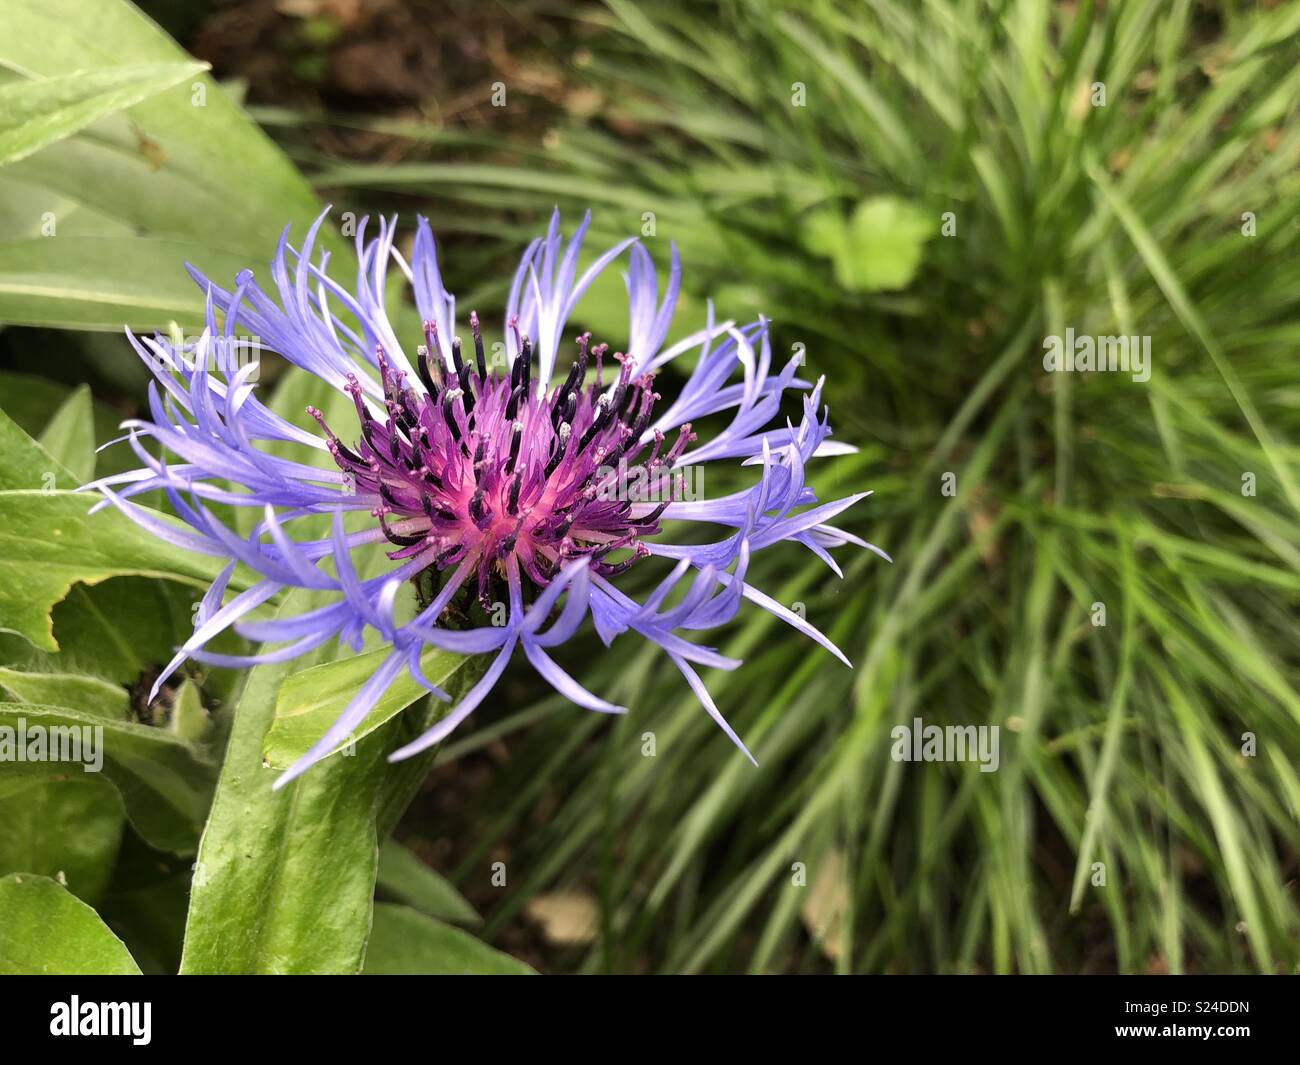 Cornflower close up against green background Stock Photo